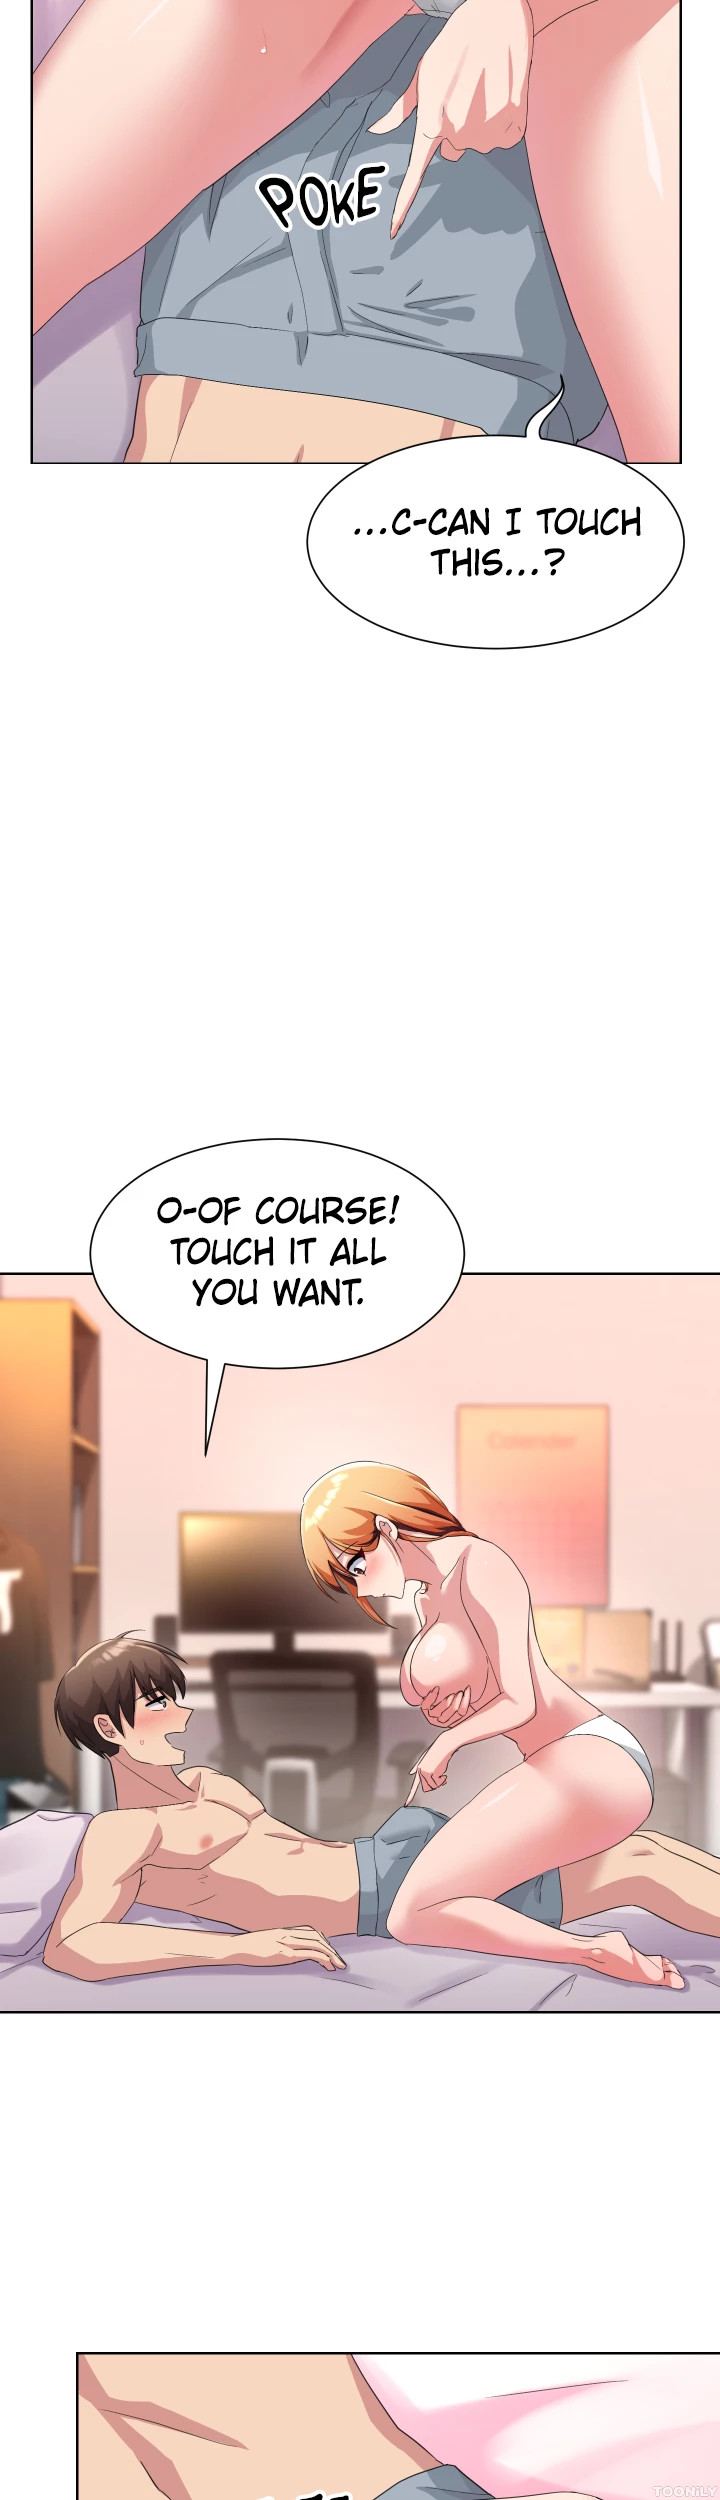 Girls I Used to Teach - Chapter 4 Page 16